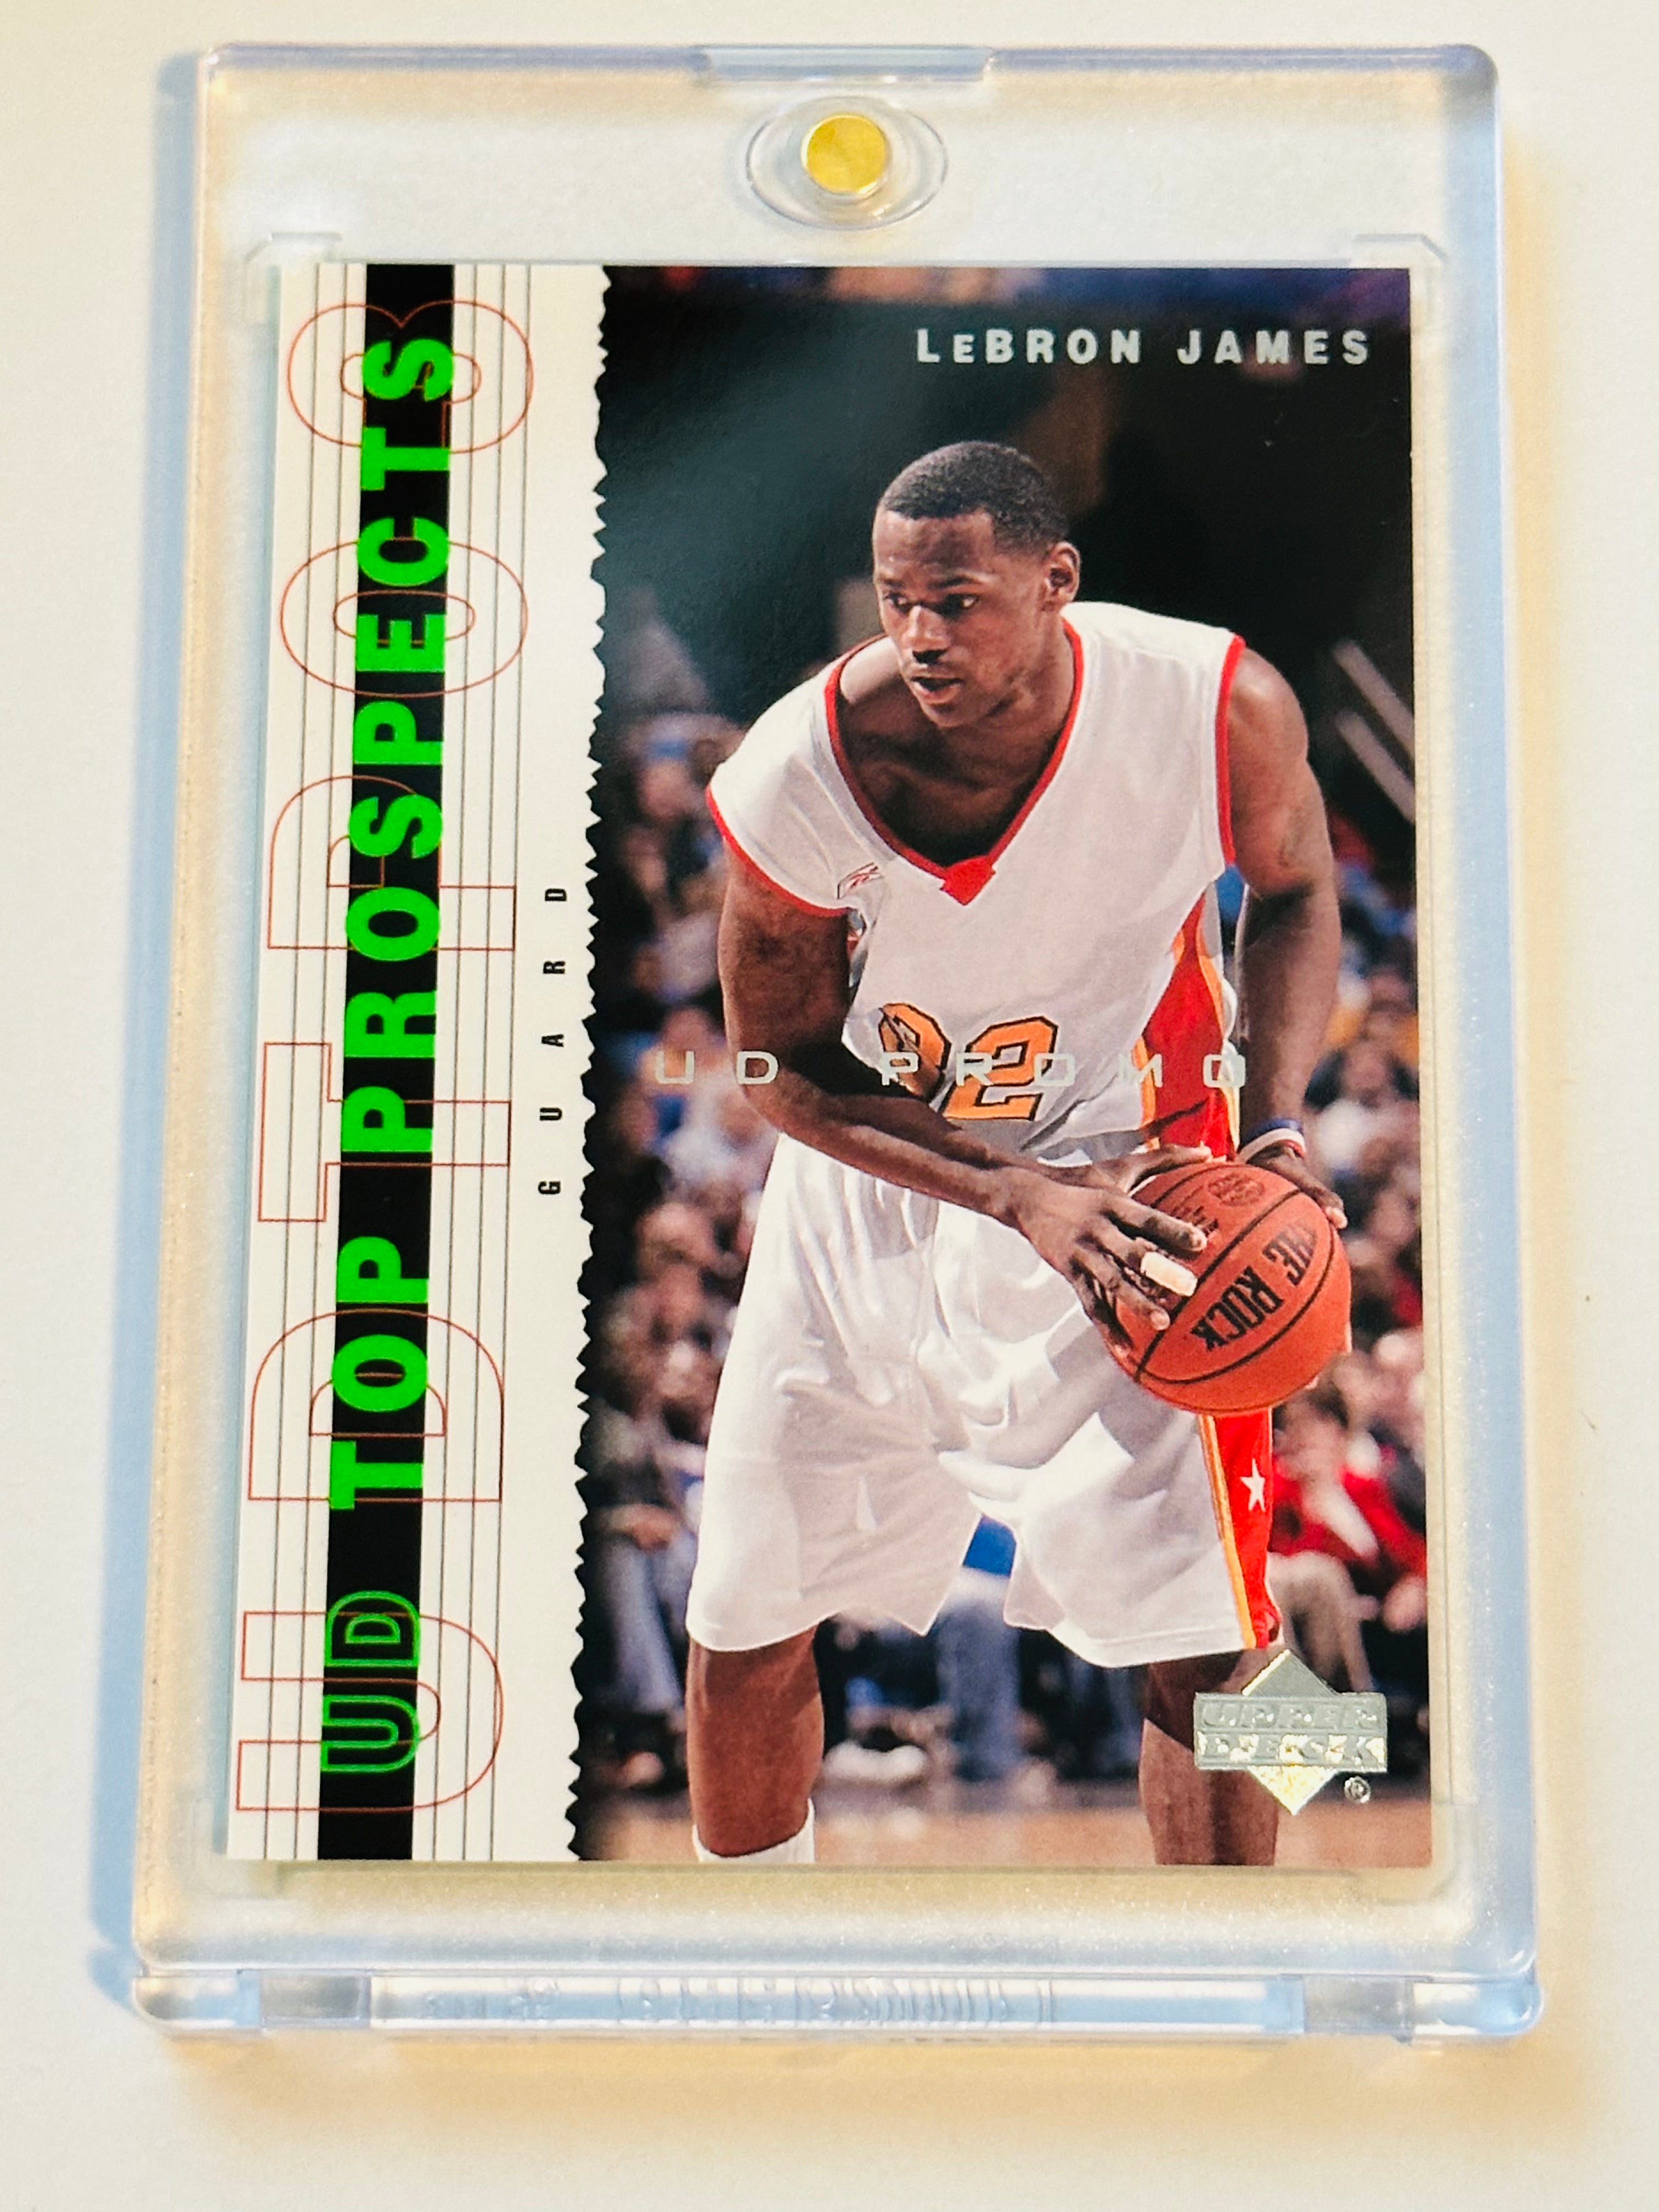 LeBron James UD Top Prospects Rookie NBA Promo Card 2003